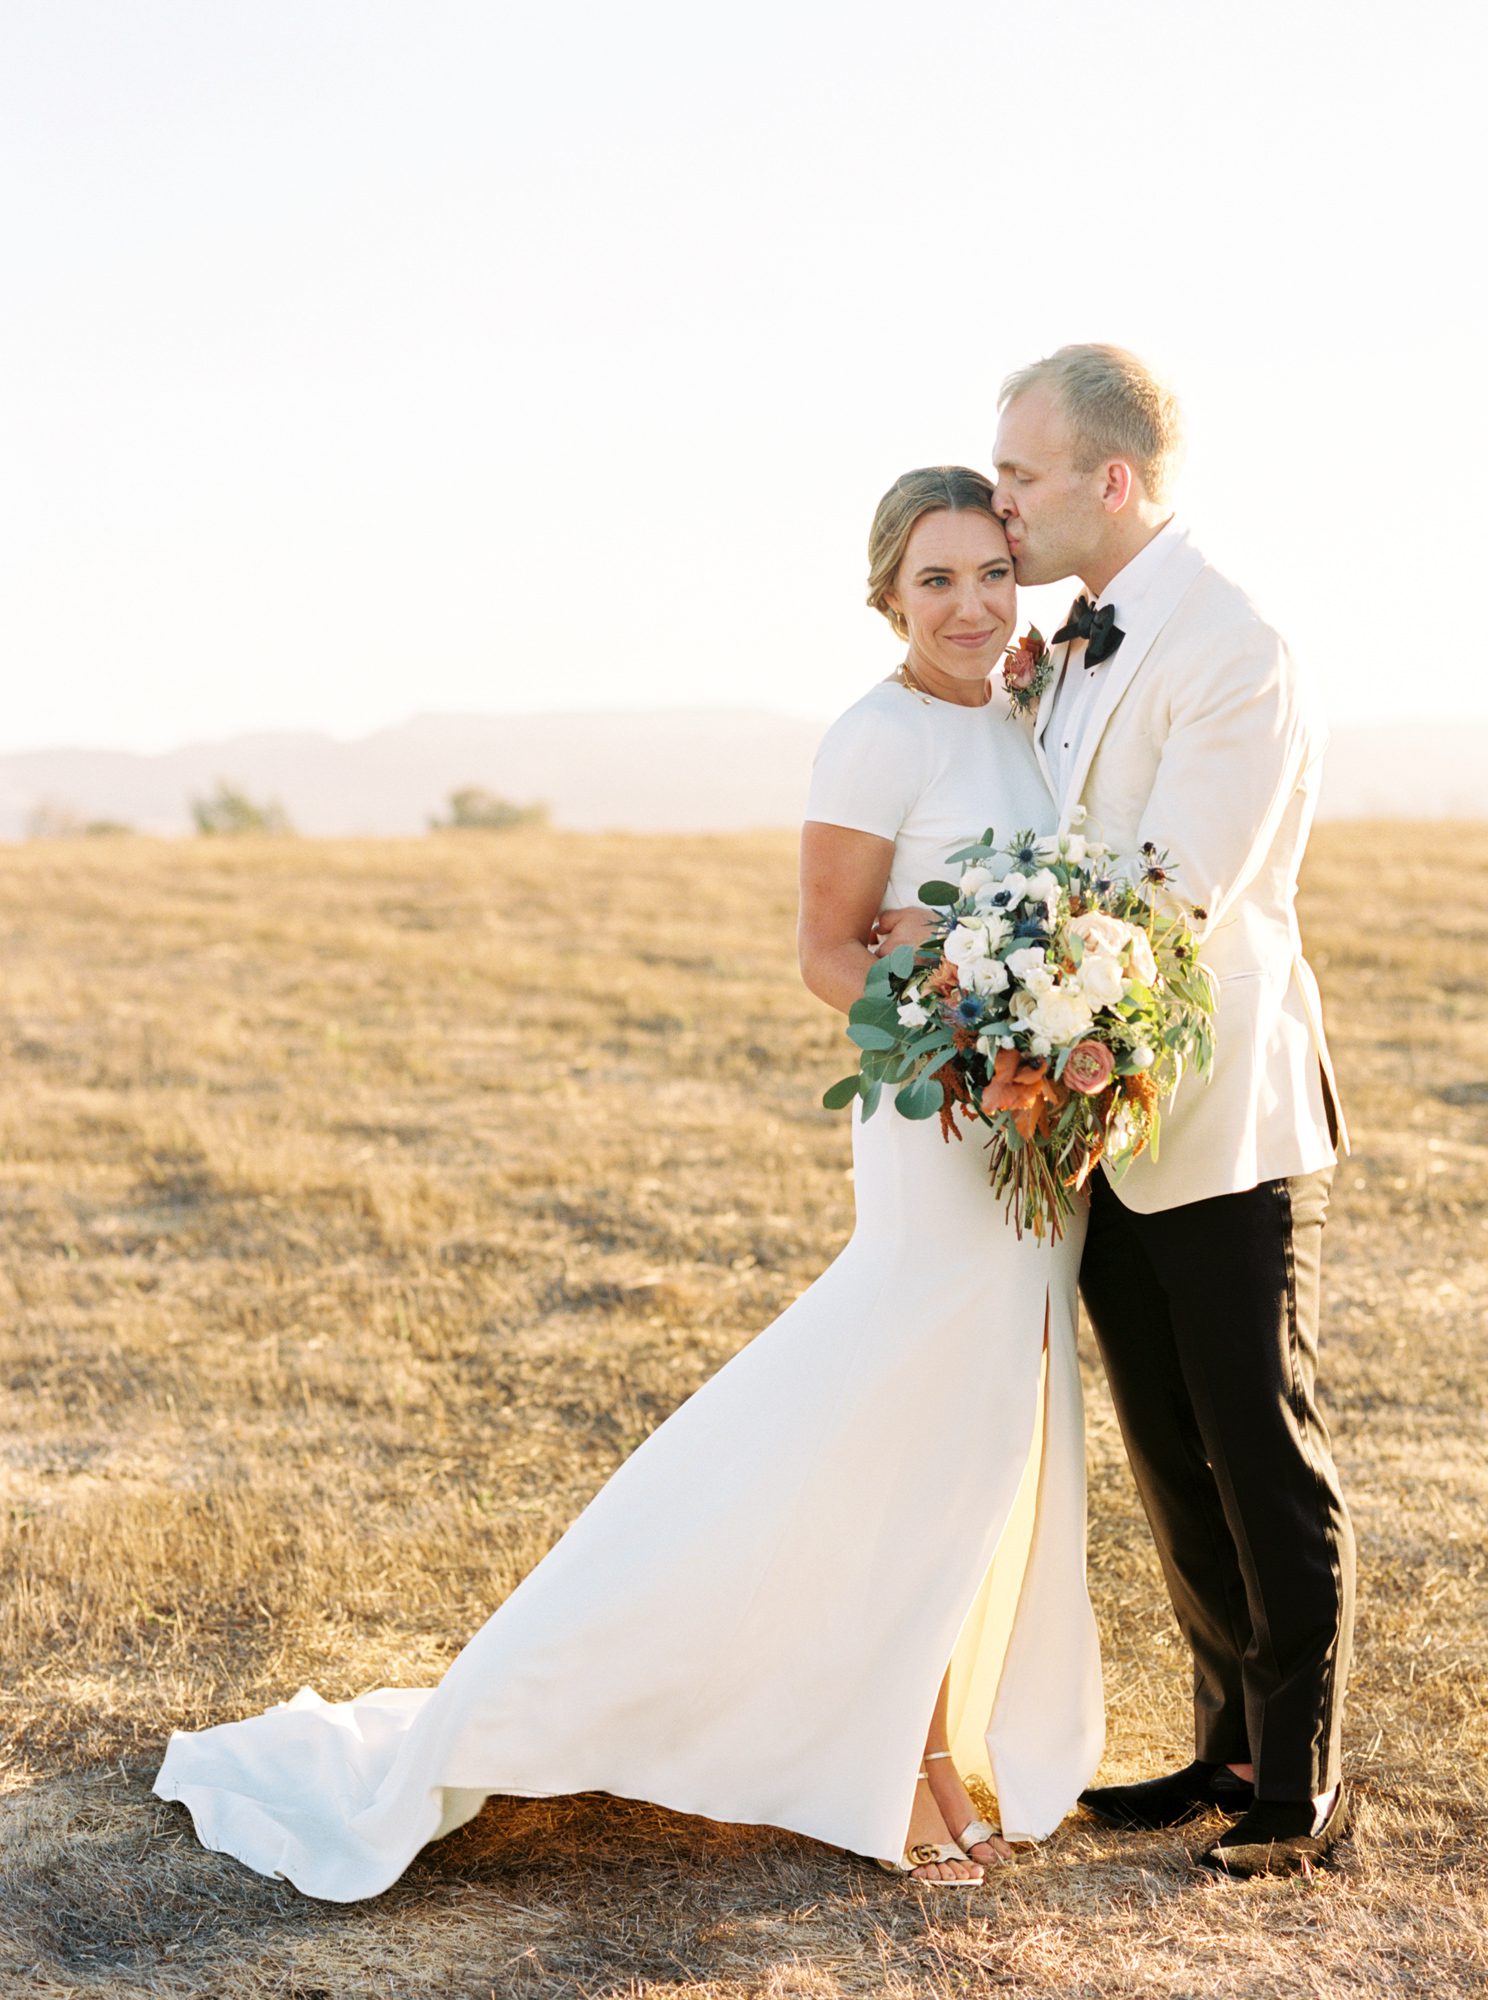 Sunset portraits at Flying Caballos Ranch by Loveridge Photography - Bride in Sarah Seven dress and groom is J Crew Suit